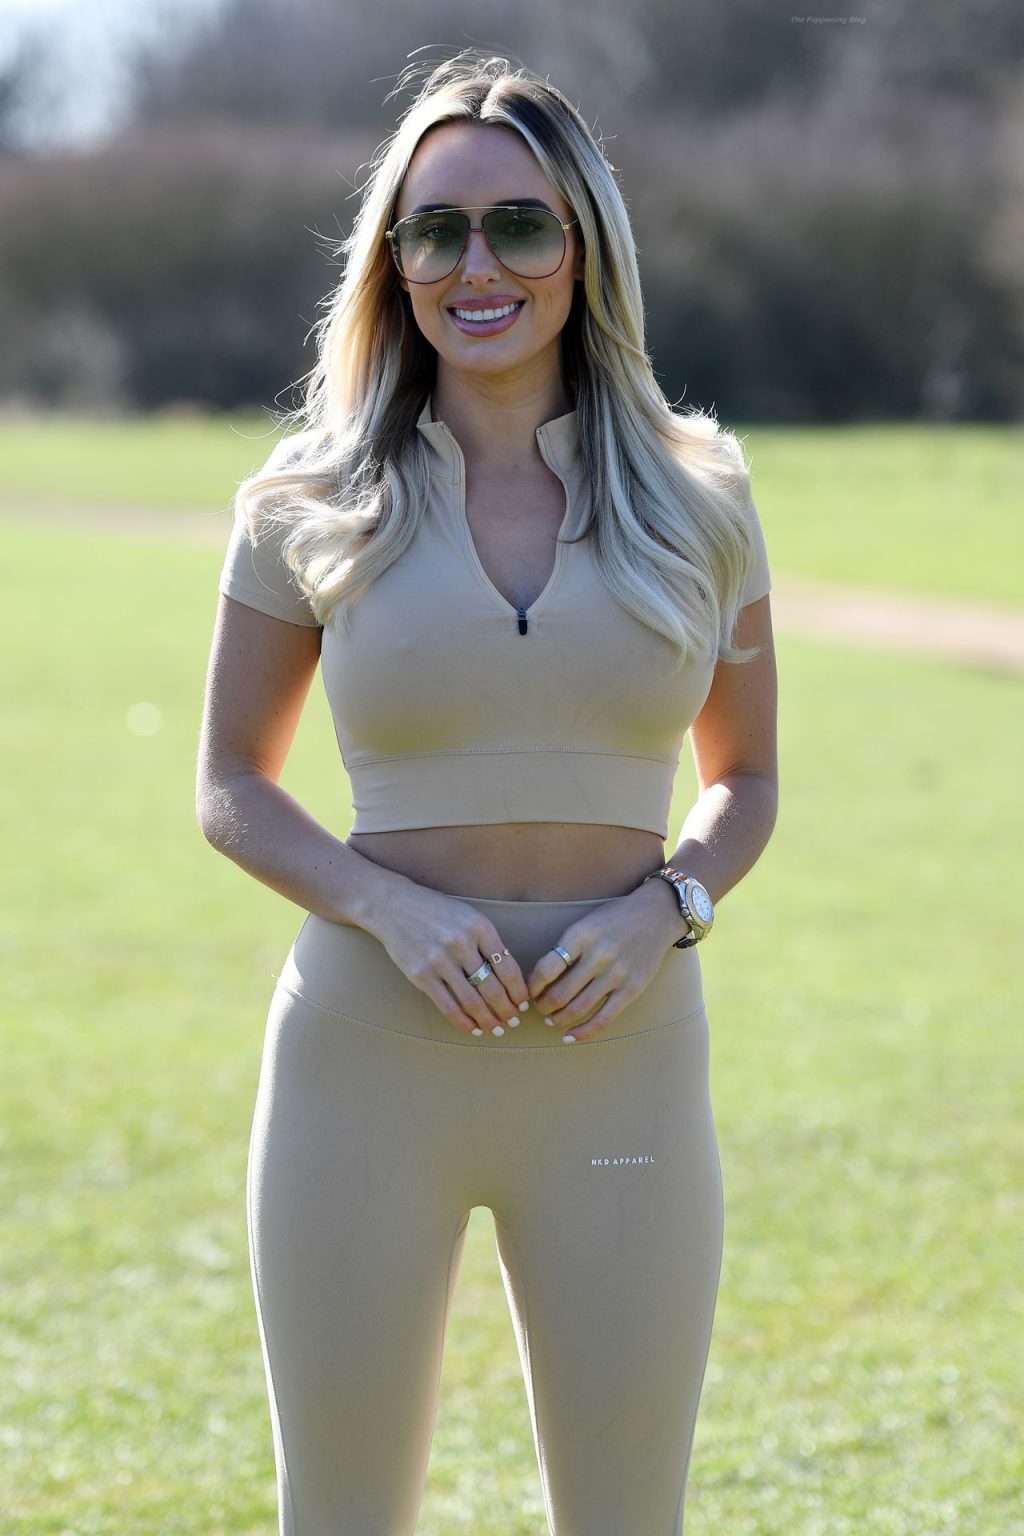 Amber Turner Shows Off Her Pokies in Essex (27 Photos)